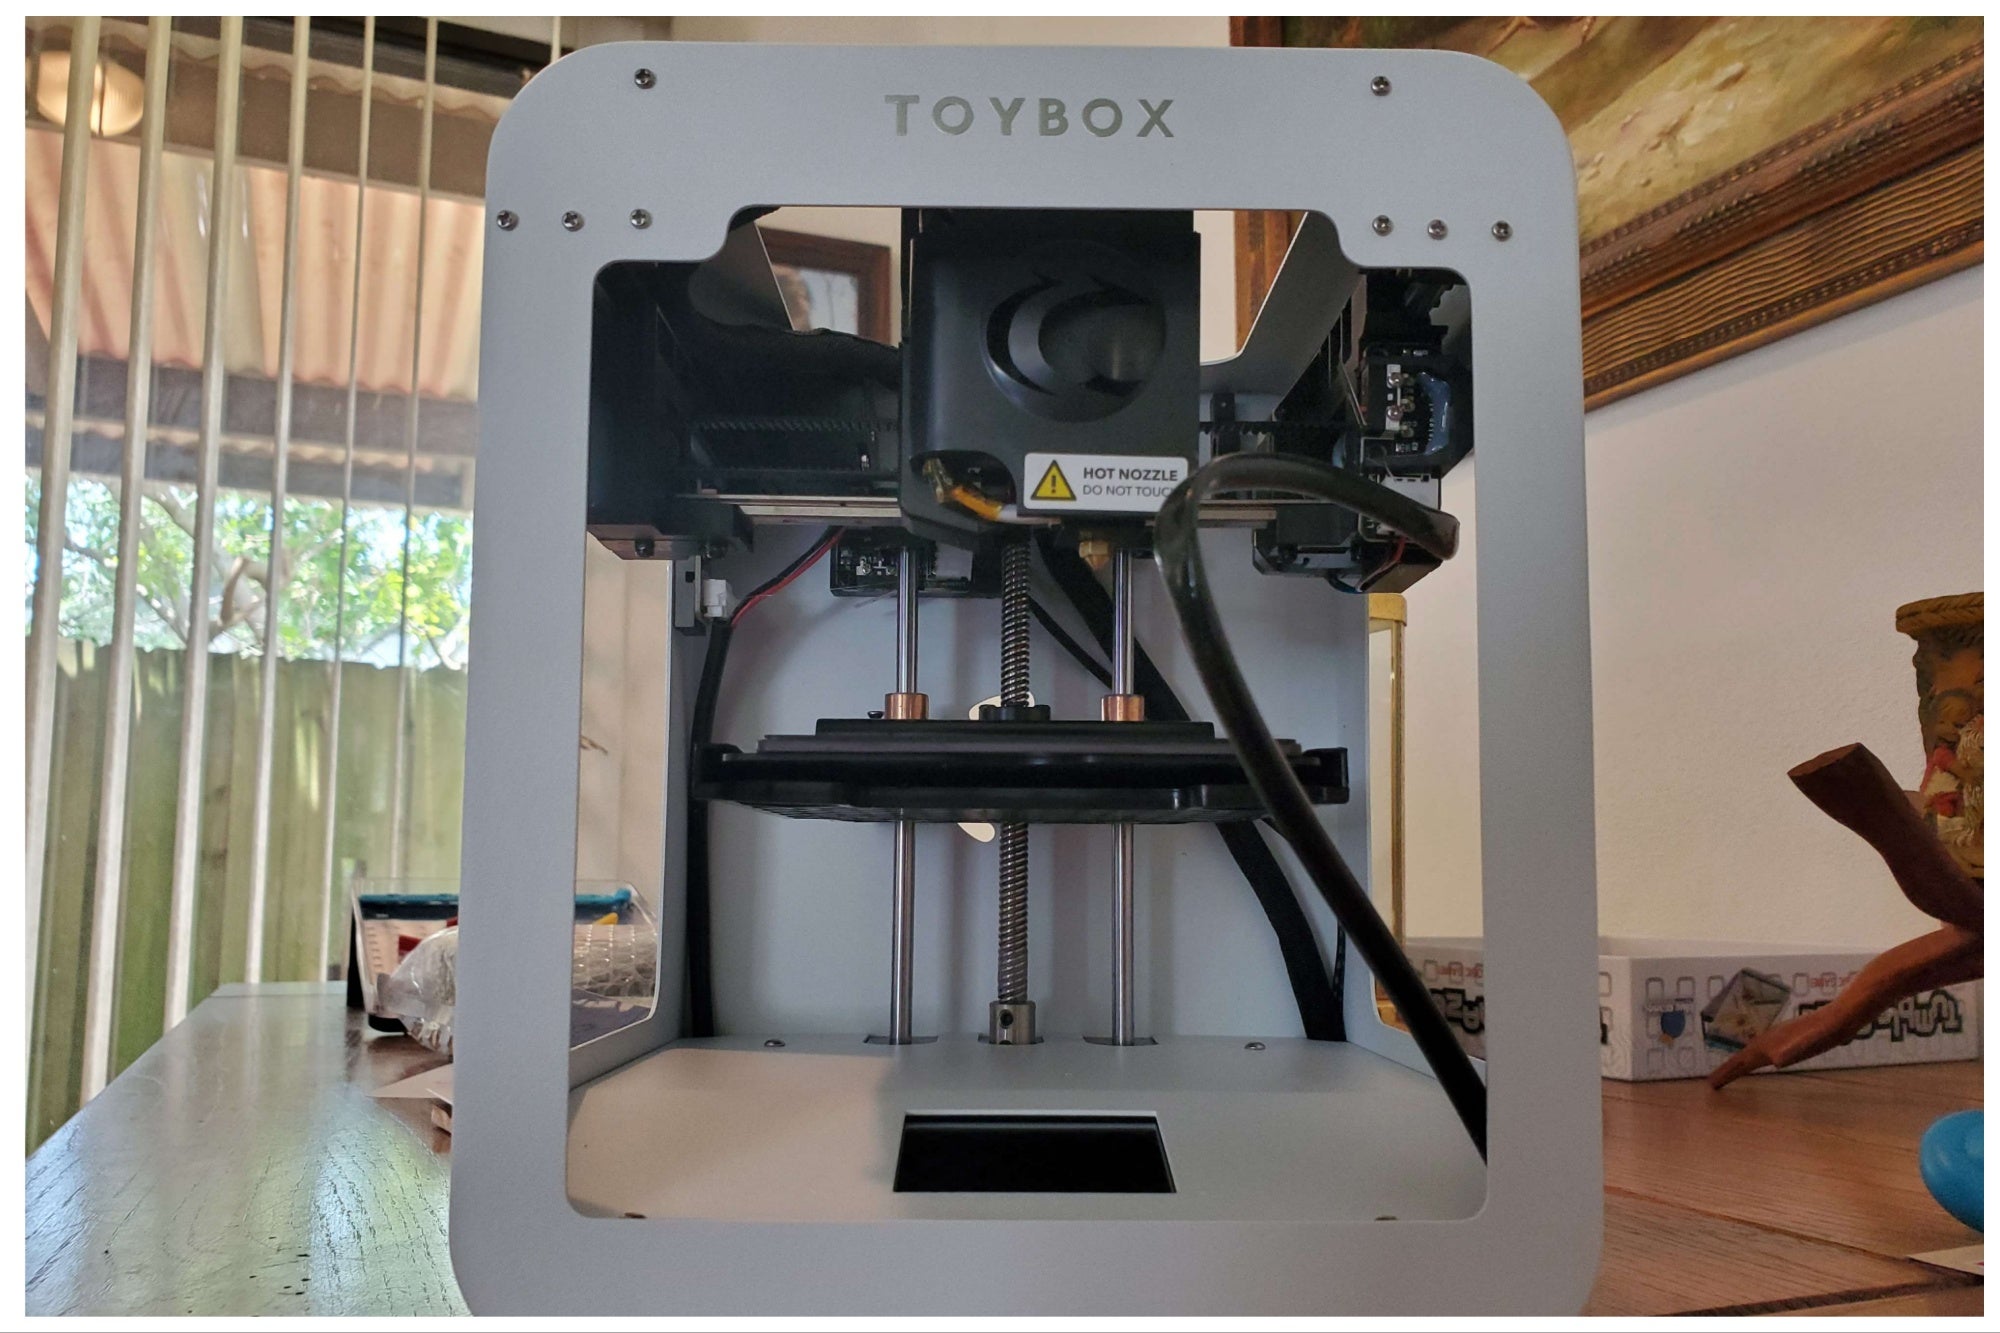 Toybox 3D printer review: A fun factory for kids and beginners